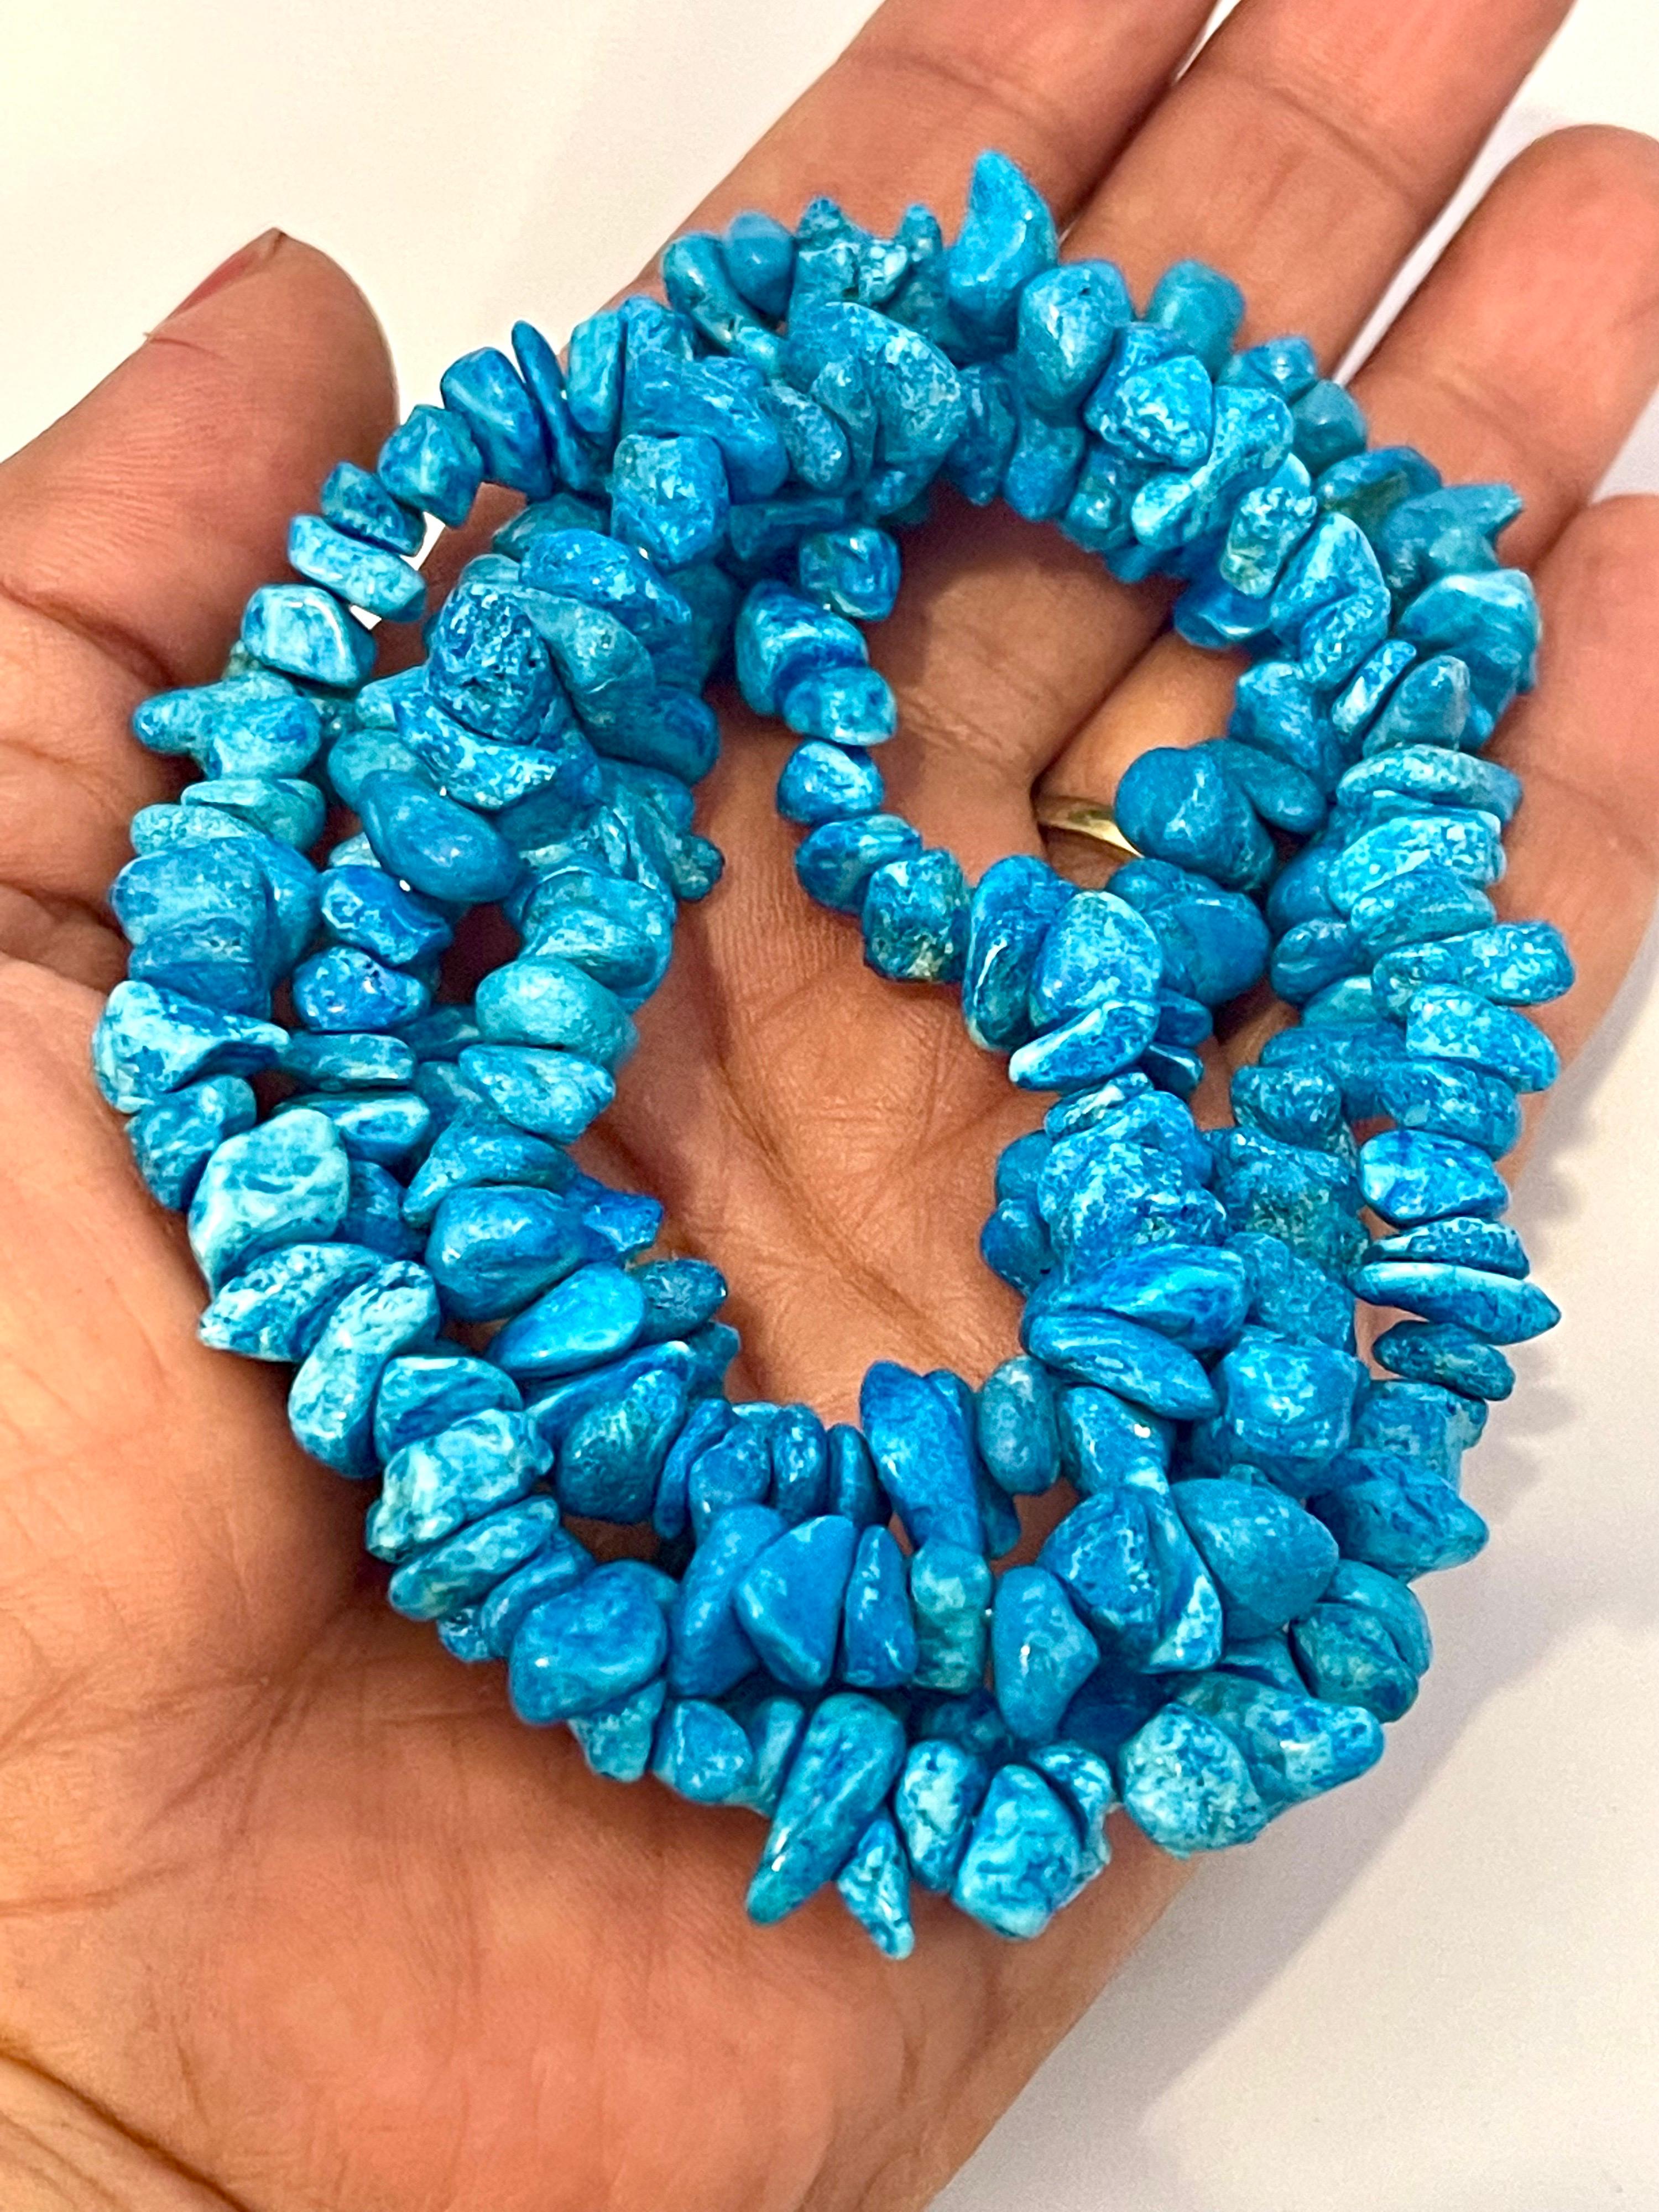 
32 inch Turquoise Chip Necklace 6-8mm -Turquoise Beads Turquoise Gemstone Natural
Very uniform beads , bright color and luster 
Natural Stone
Total weight of the necklace is  81 Gm
Its very hard to capture the true color and luster of the stone, I